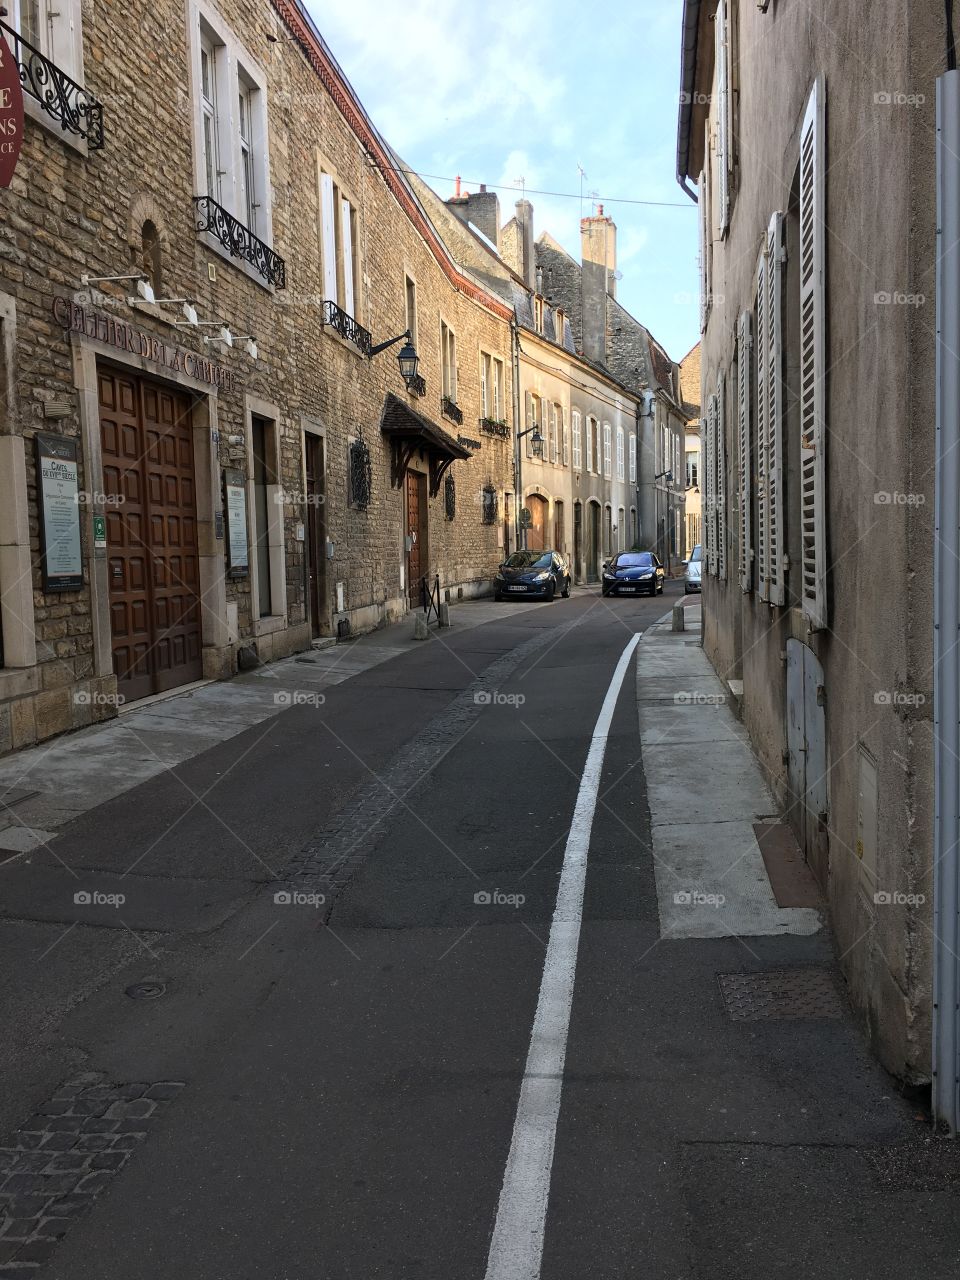 Along quiet street in Burgundy, France 